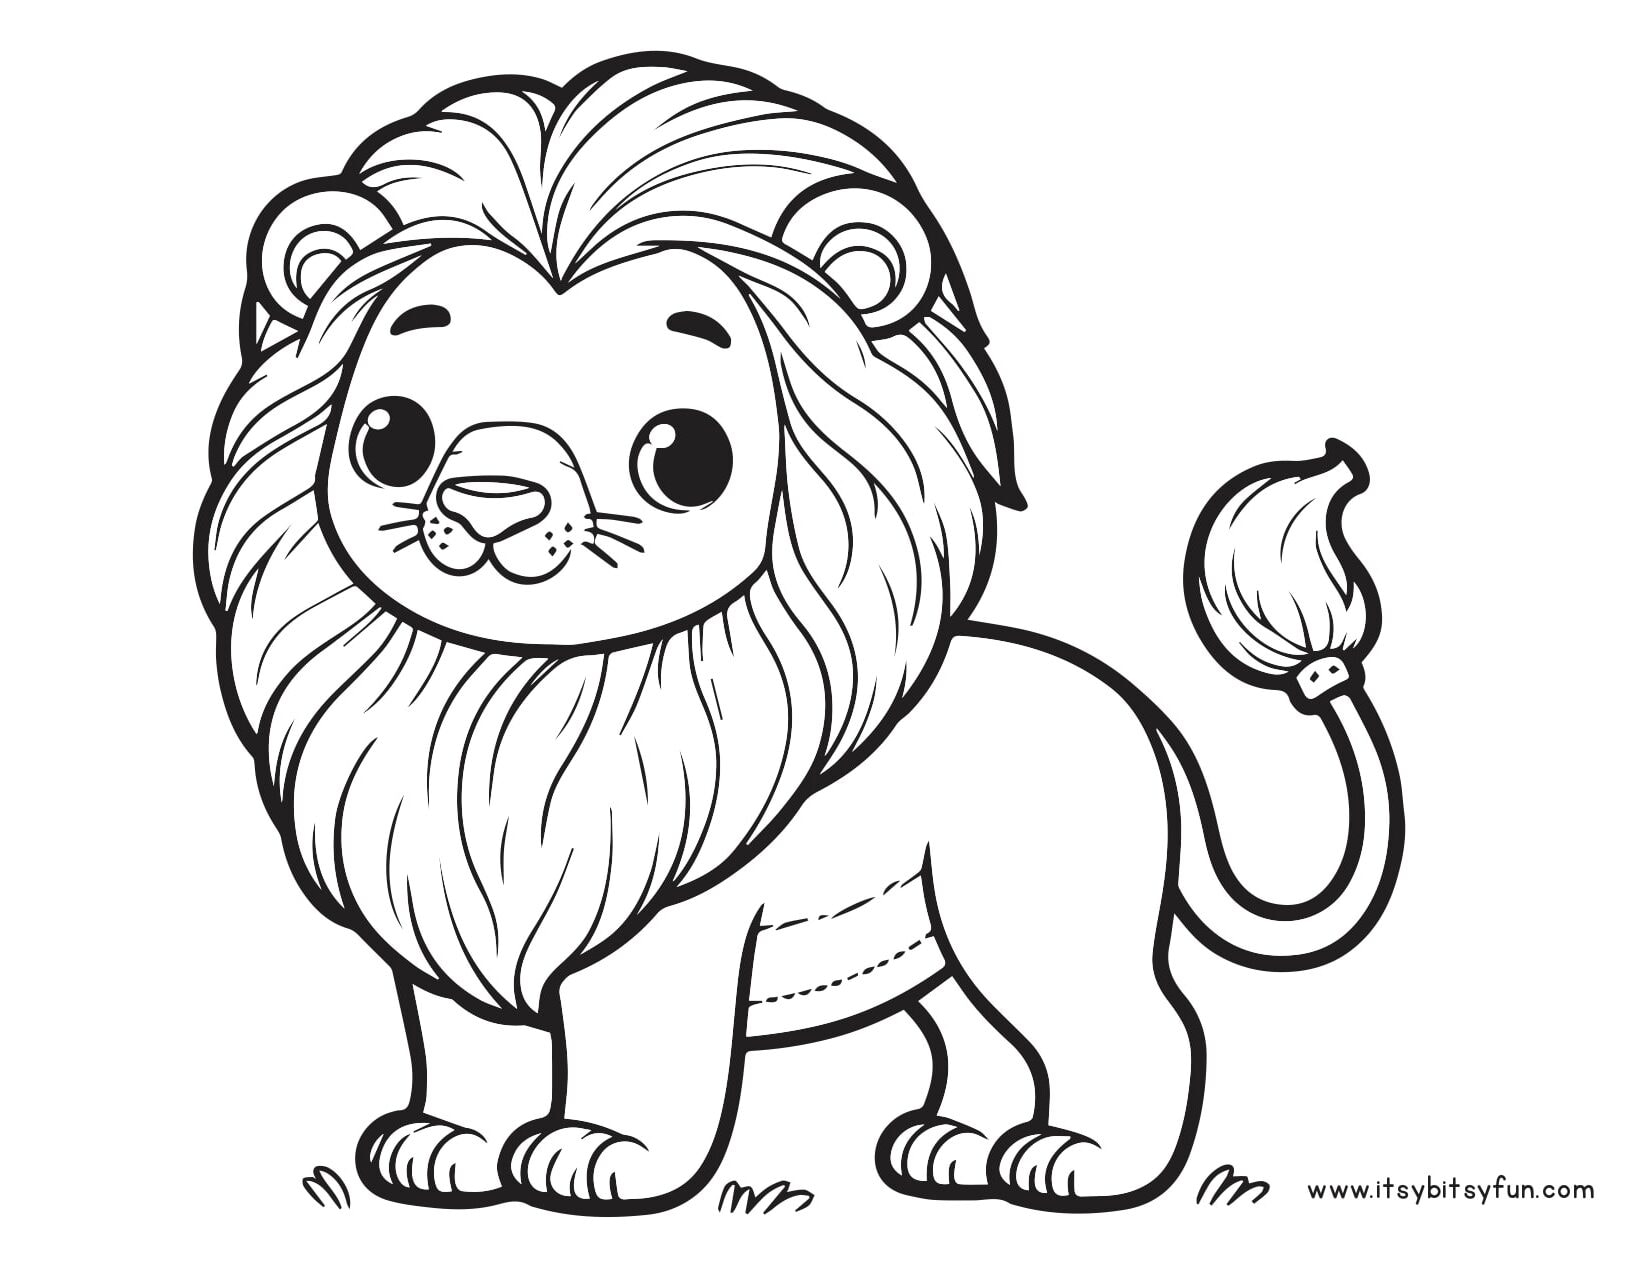 Cute image of a lion with a beautiful mane to color.